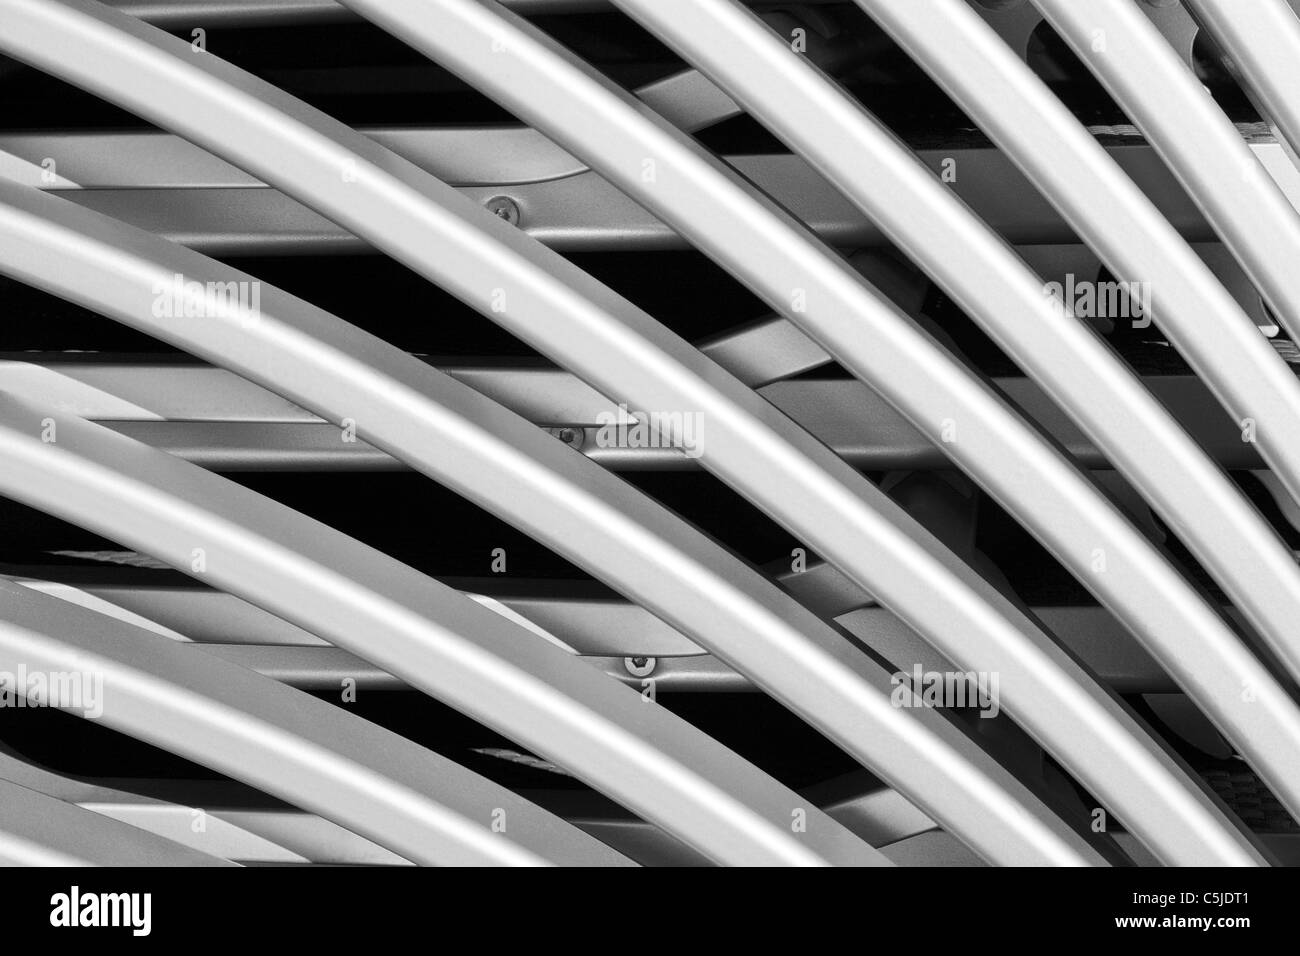 Abstract shapes and patterns formed by stacking deck chairs Stock Photo